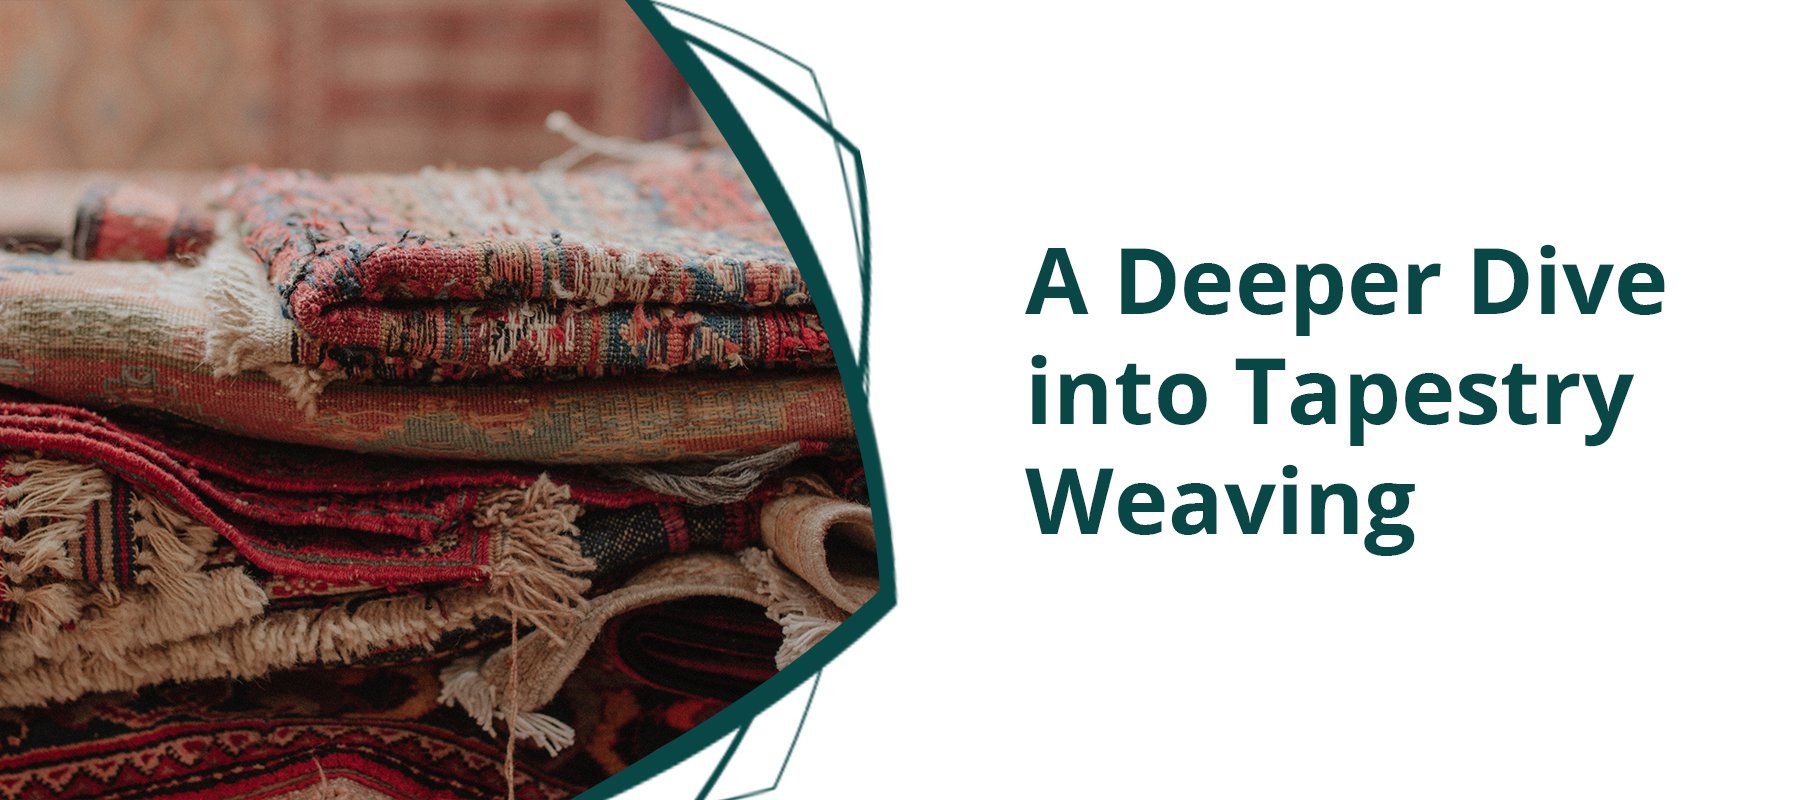 Weaving Tapestry: A Deeper Dive